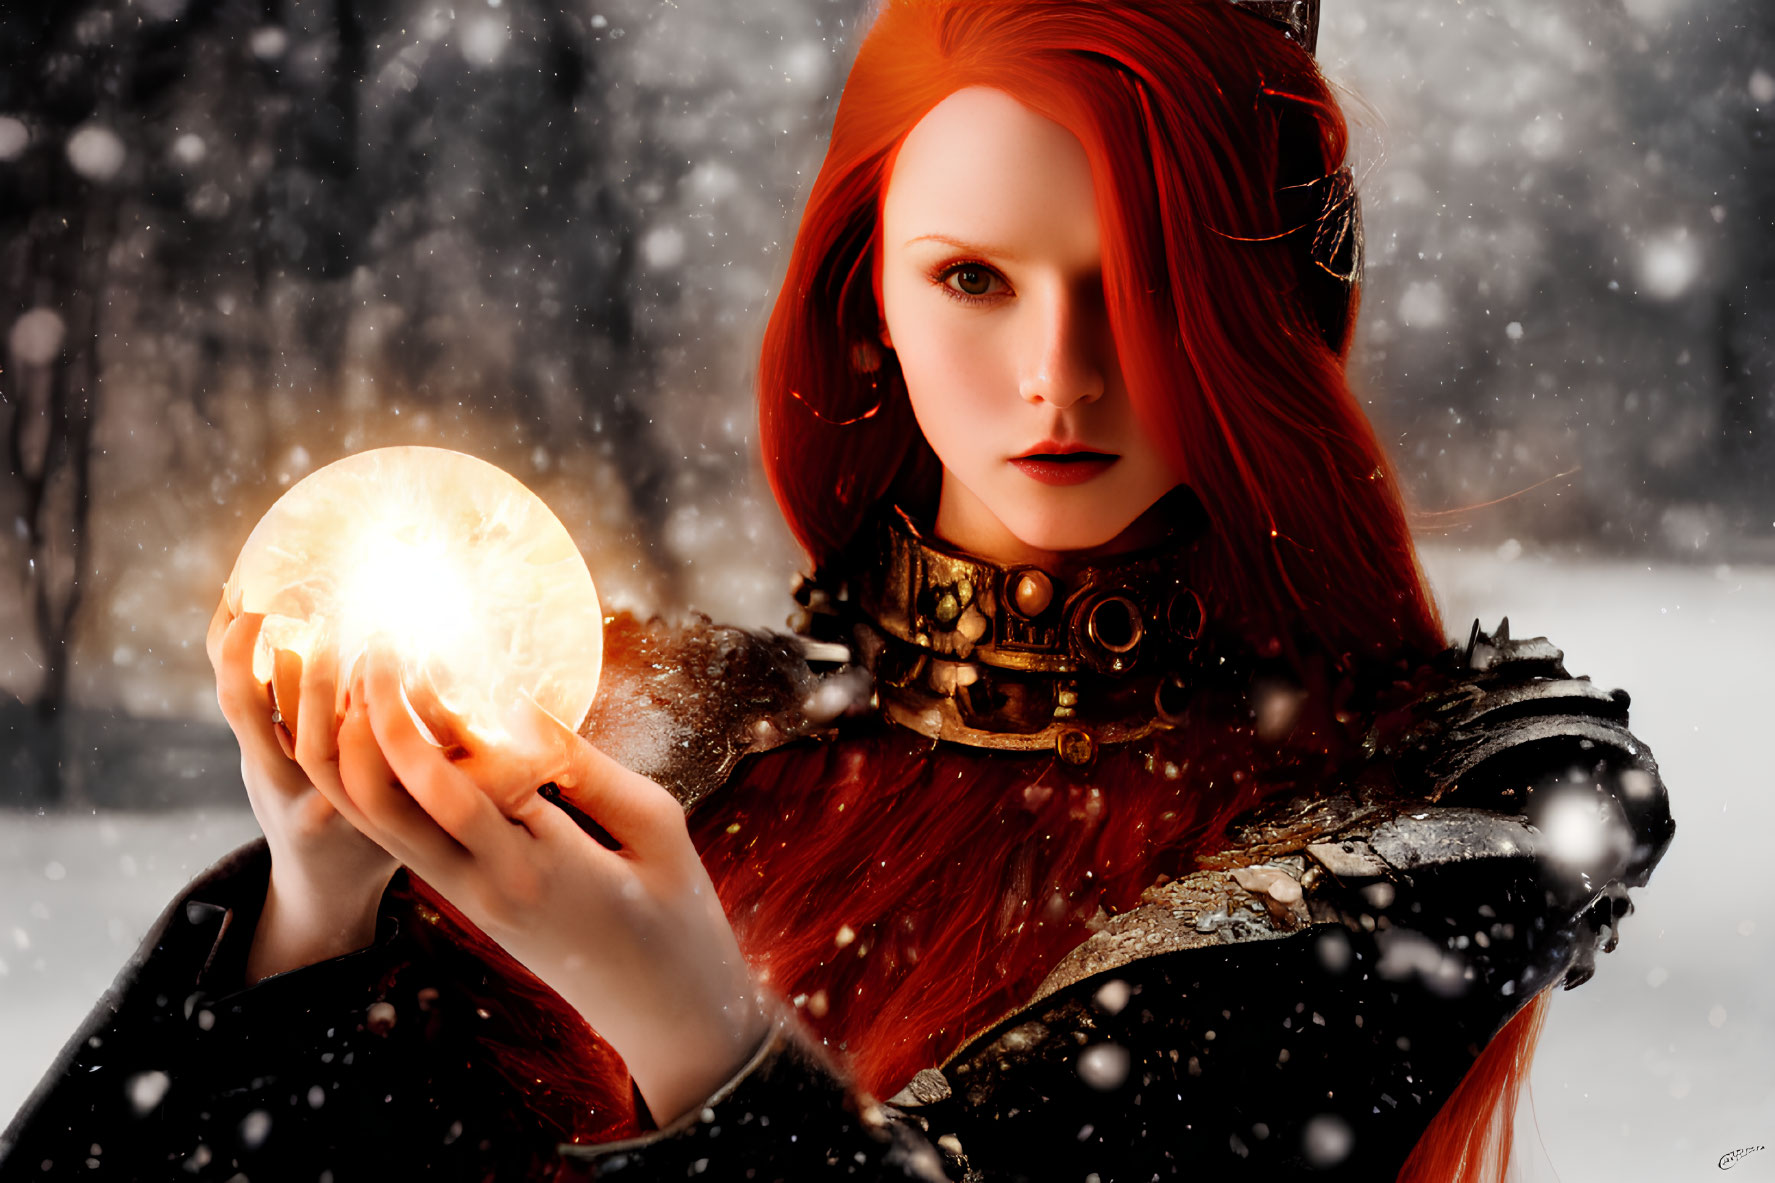 Digital artwork: Woman with red hair holding glowing orb in snowy setting